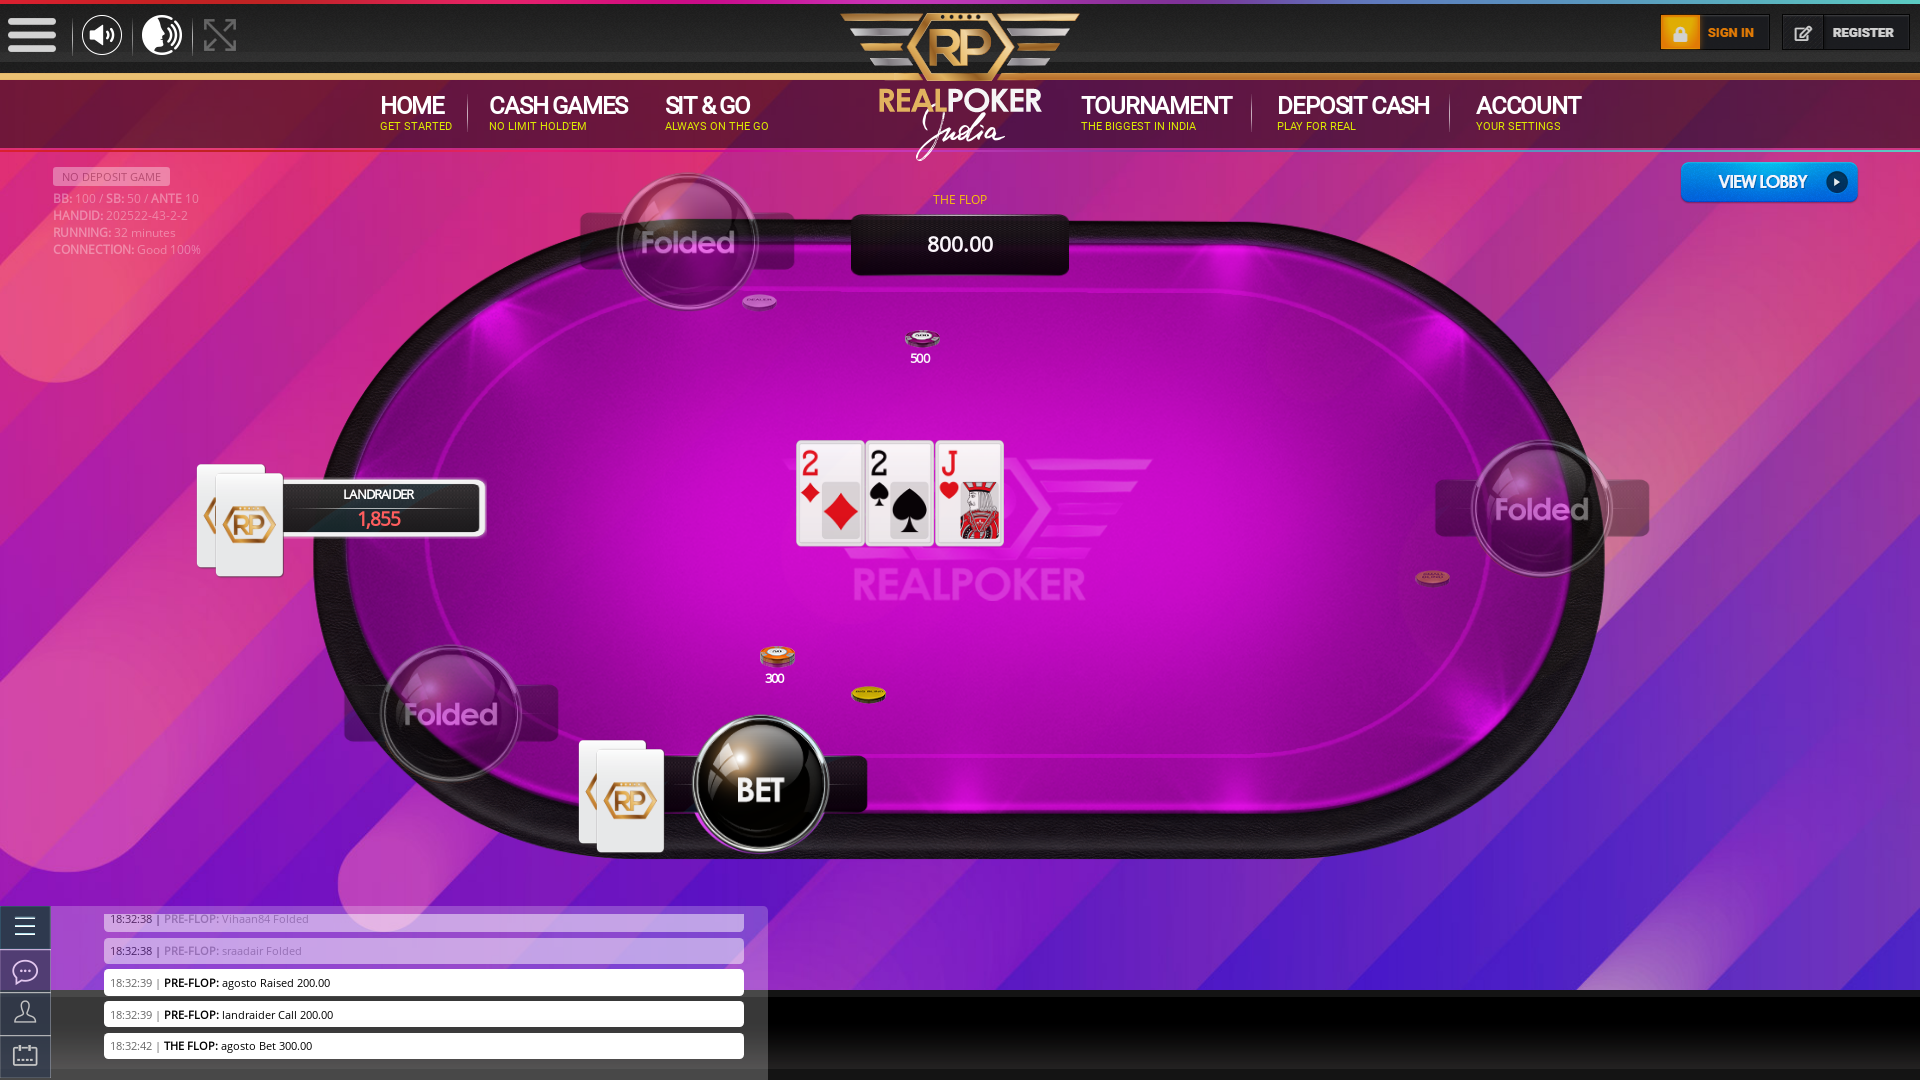 10 player texas holdem table at real poker with the table id 202522